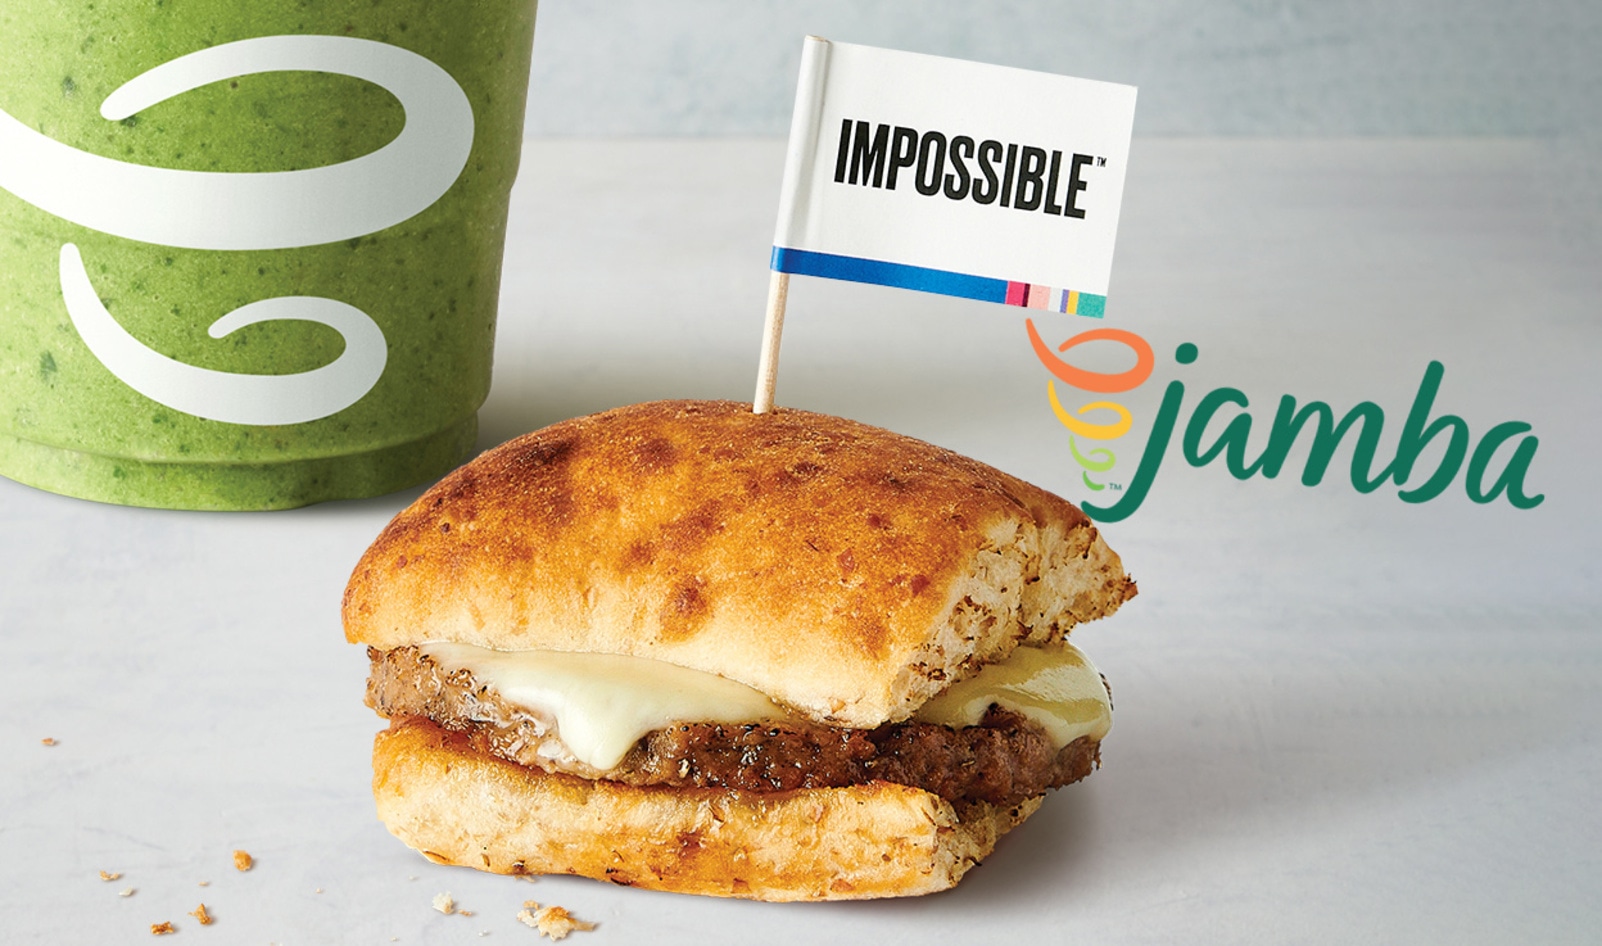 Jamba Just Launched Its First Plant-Based Meat Option at More than 700 Locations Nationwide